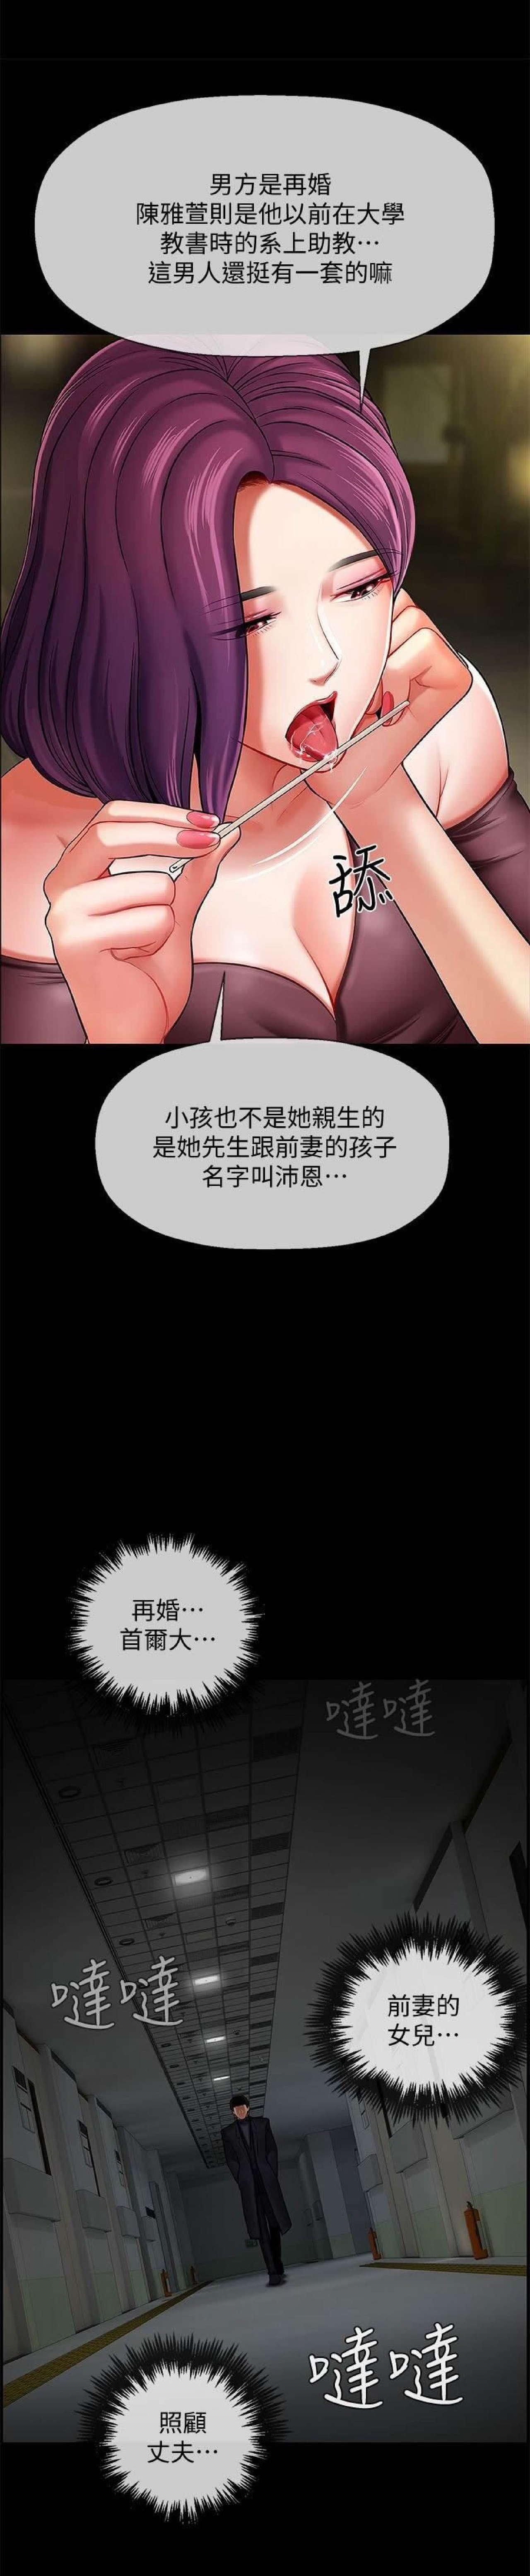 Amature Porn 坏老师 | PHYSICAL CLASSROOM 3 Gozo - Page 2